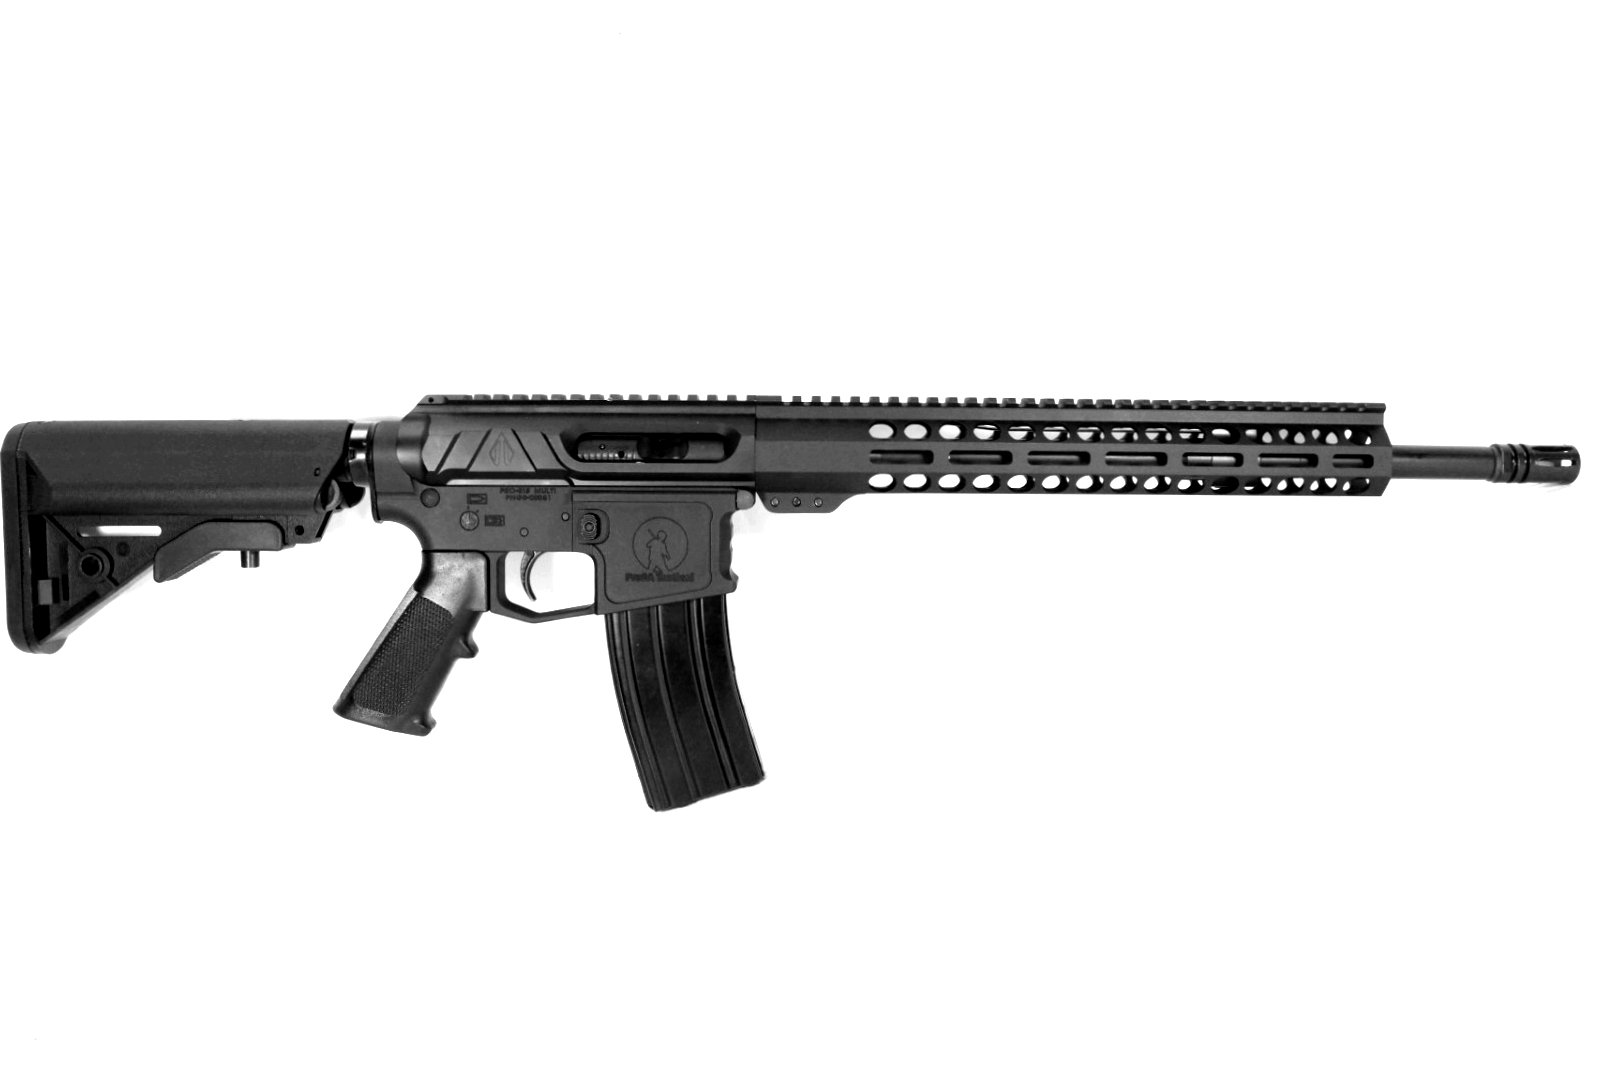 Pro2A Tactical's Valiant 16 inch AR-15 6mm ARC M-LOK Complete Side Charging Rifle